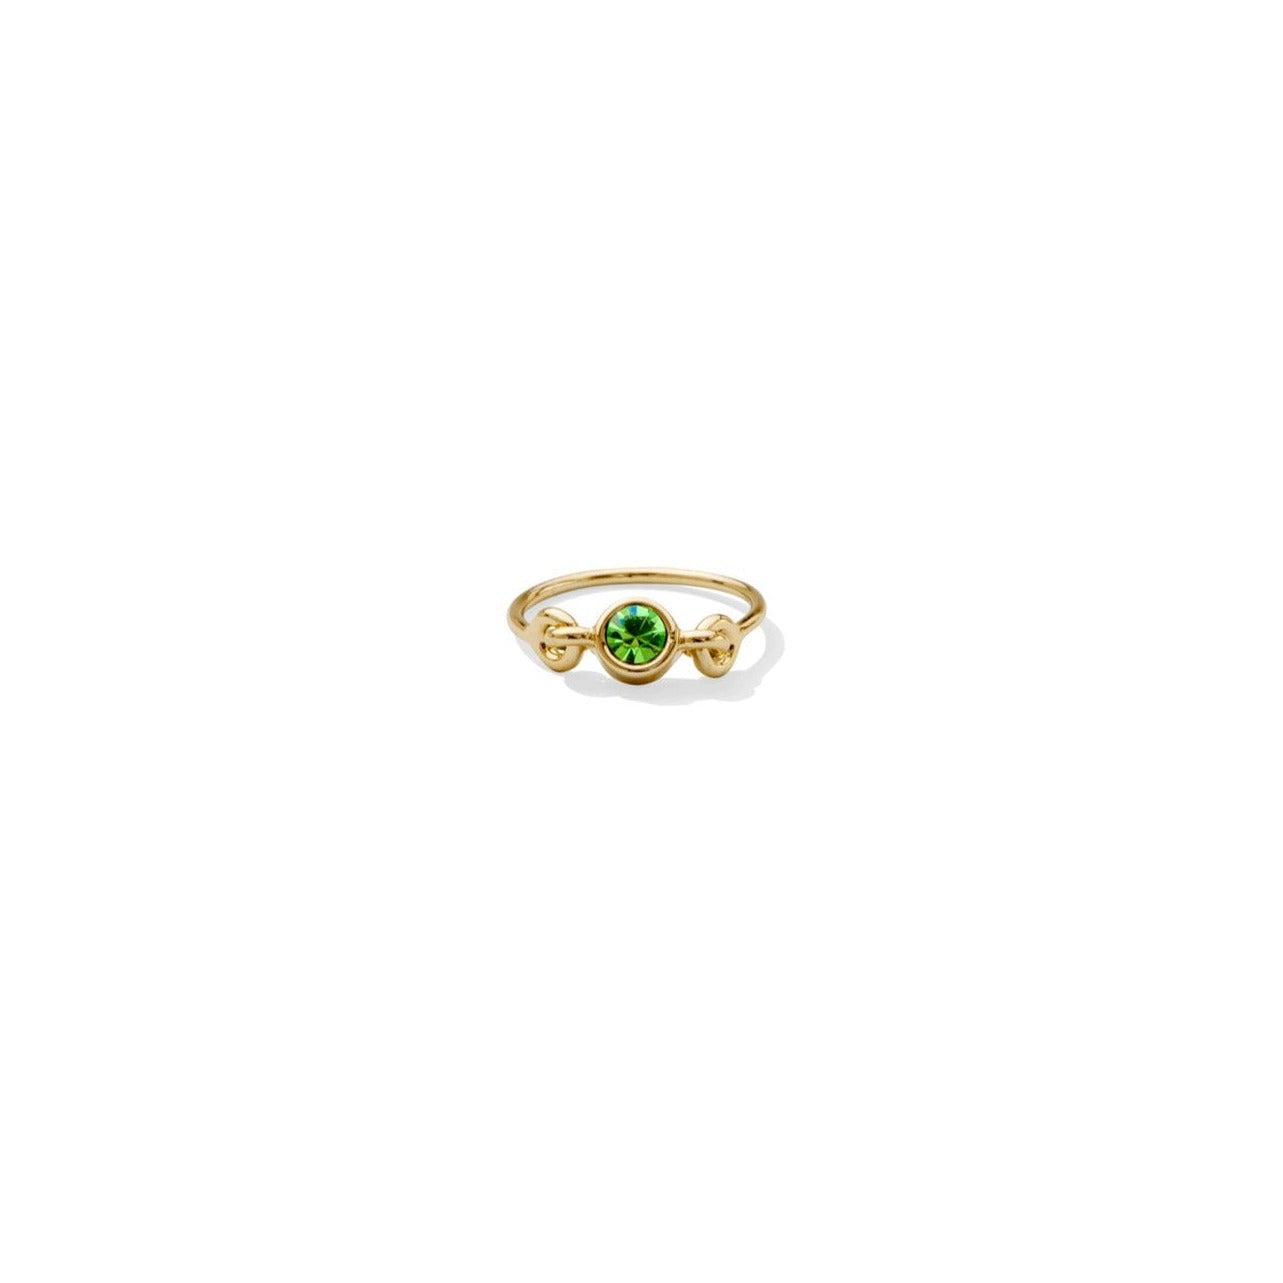 Gold plated ring with peridot crystal stone